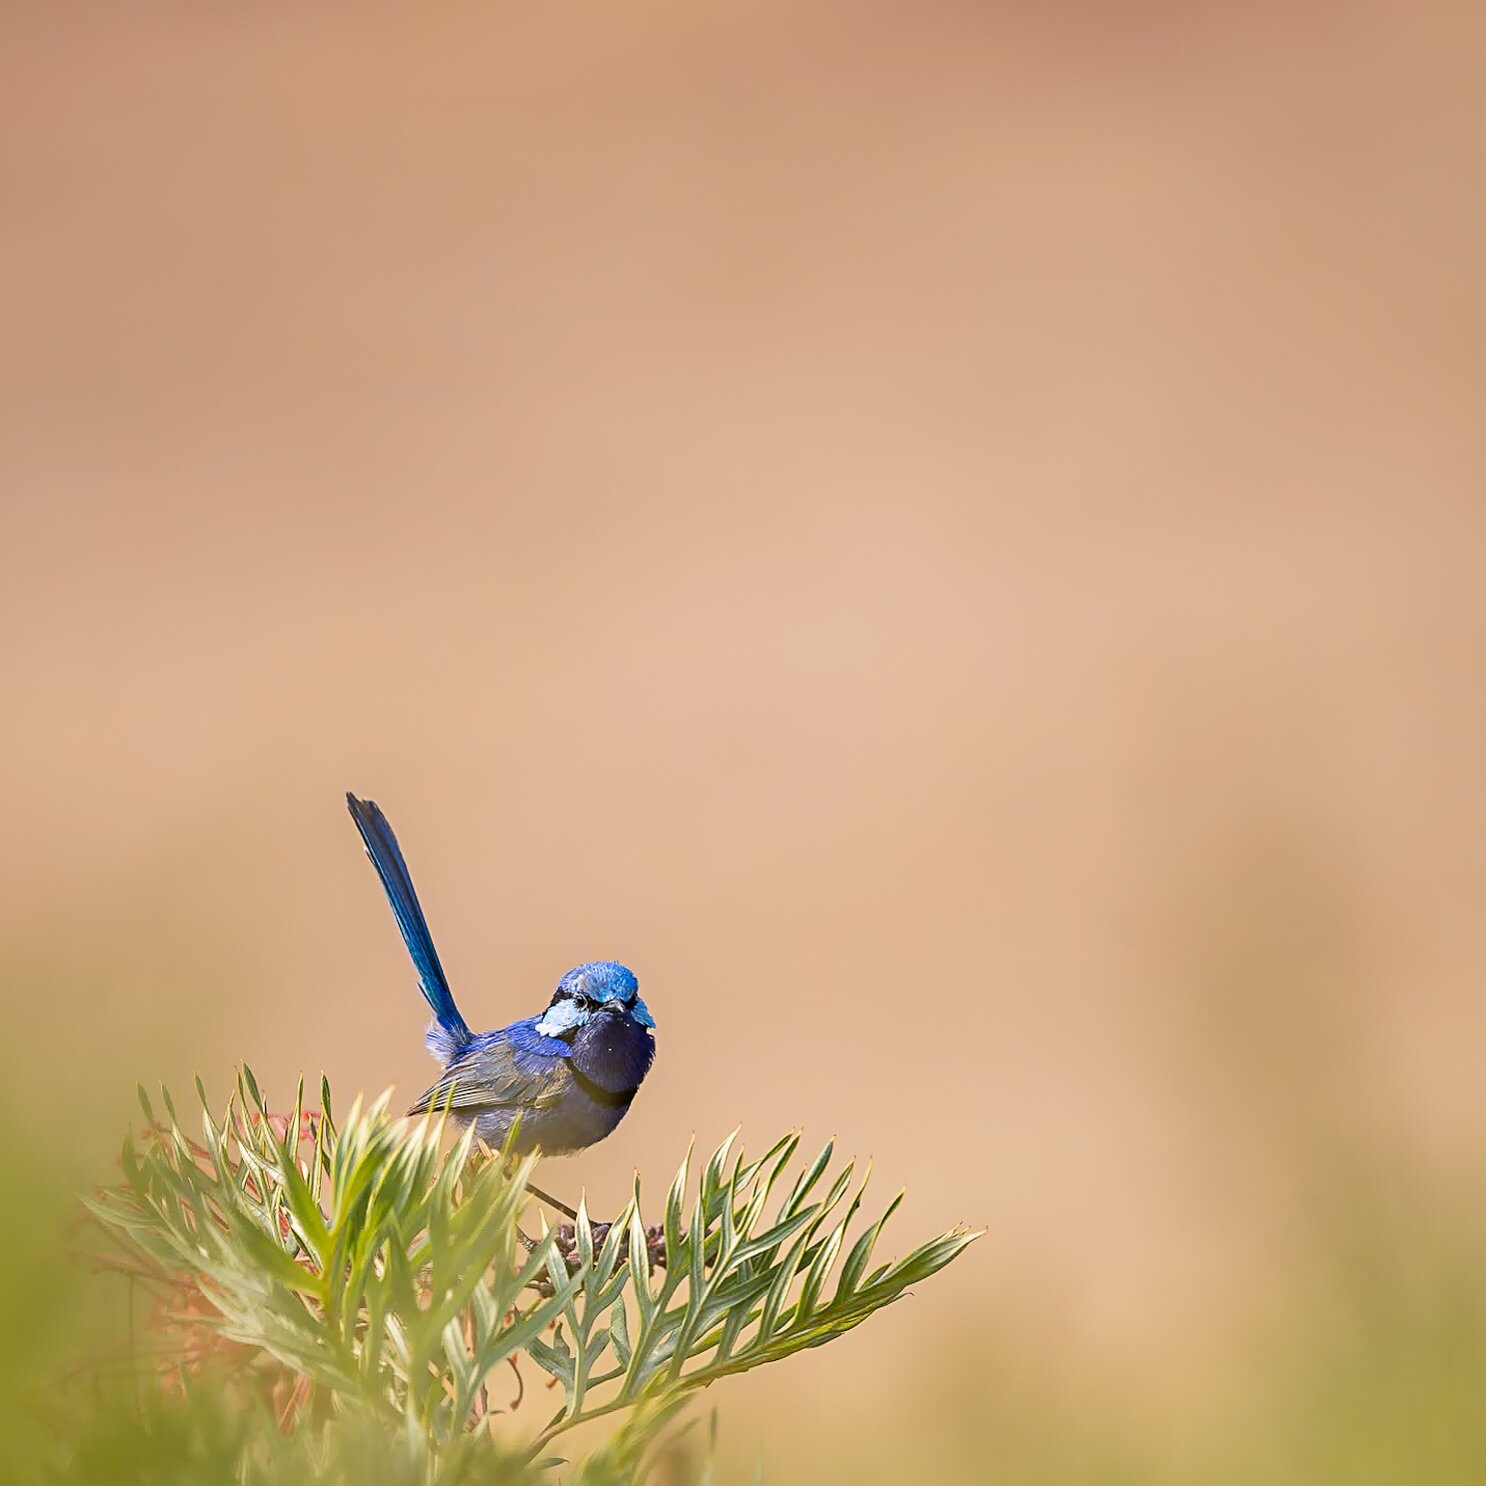 He&rsquo;s questioning me &lsquo;Aren&rsquo;t there any chances? &lsquo; I didn&rsquo;t have any answers to that question! Splendid Fairywren Male, Margaret River, Australia. #birdstagram